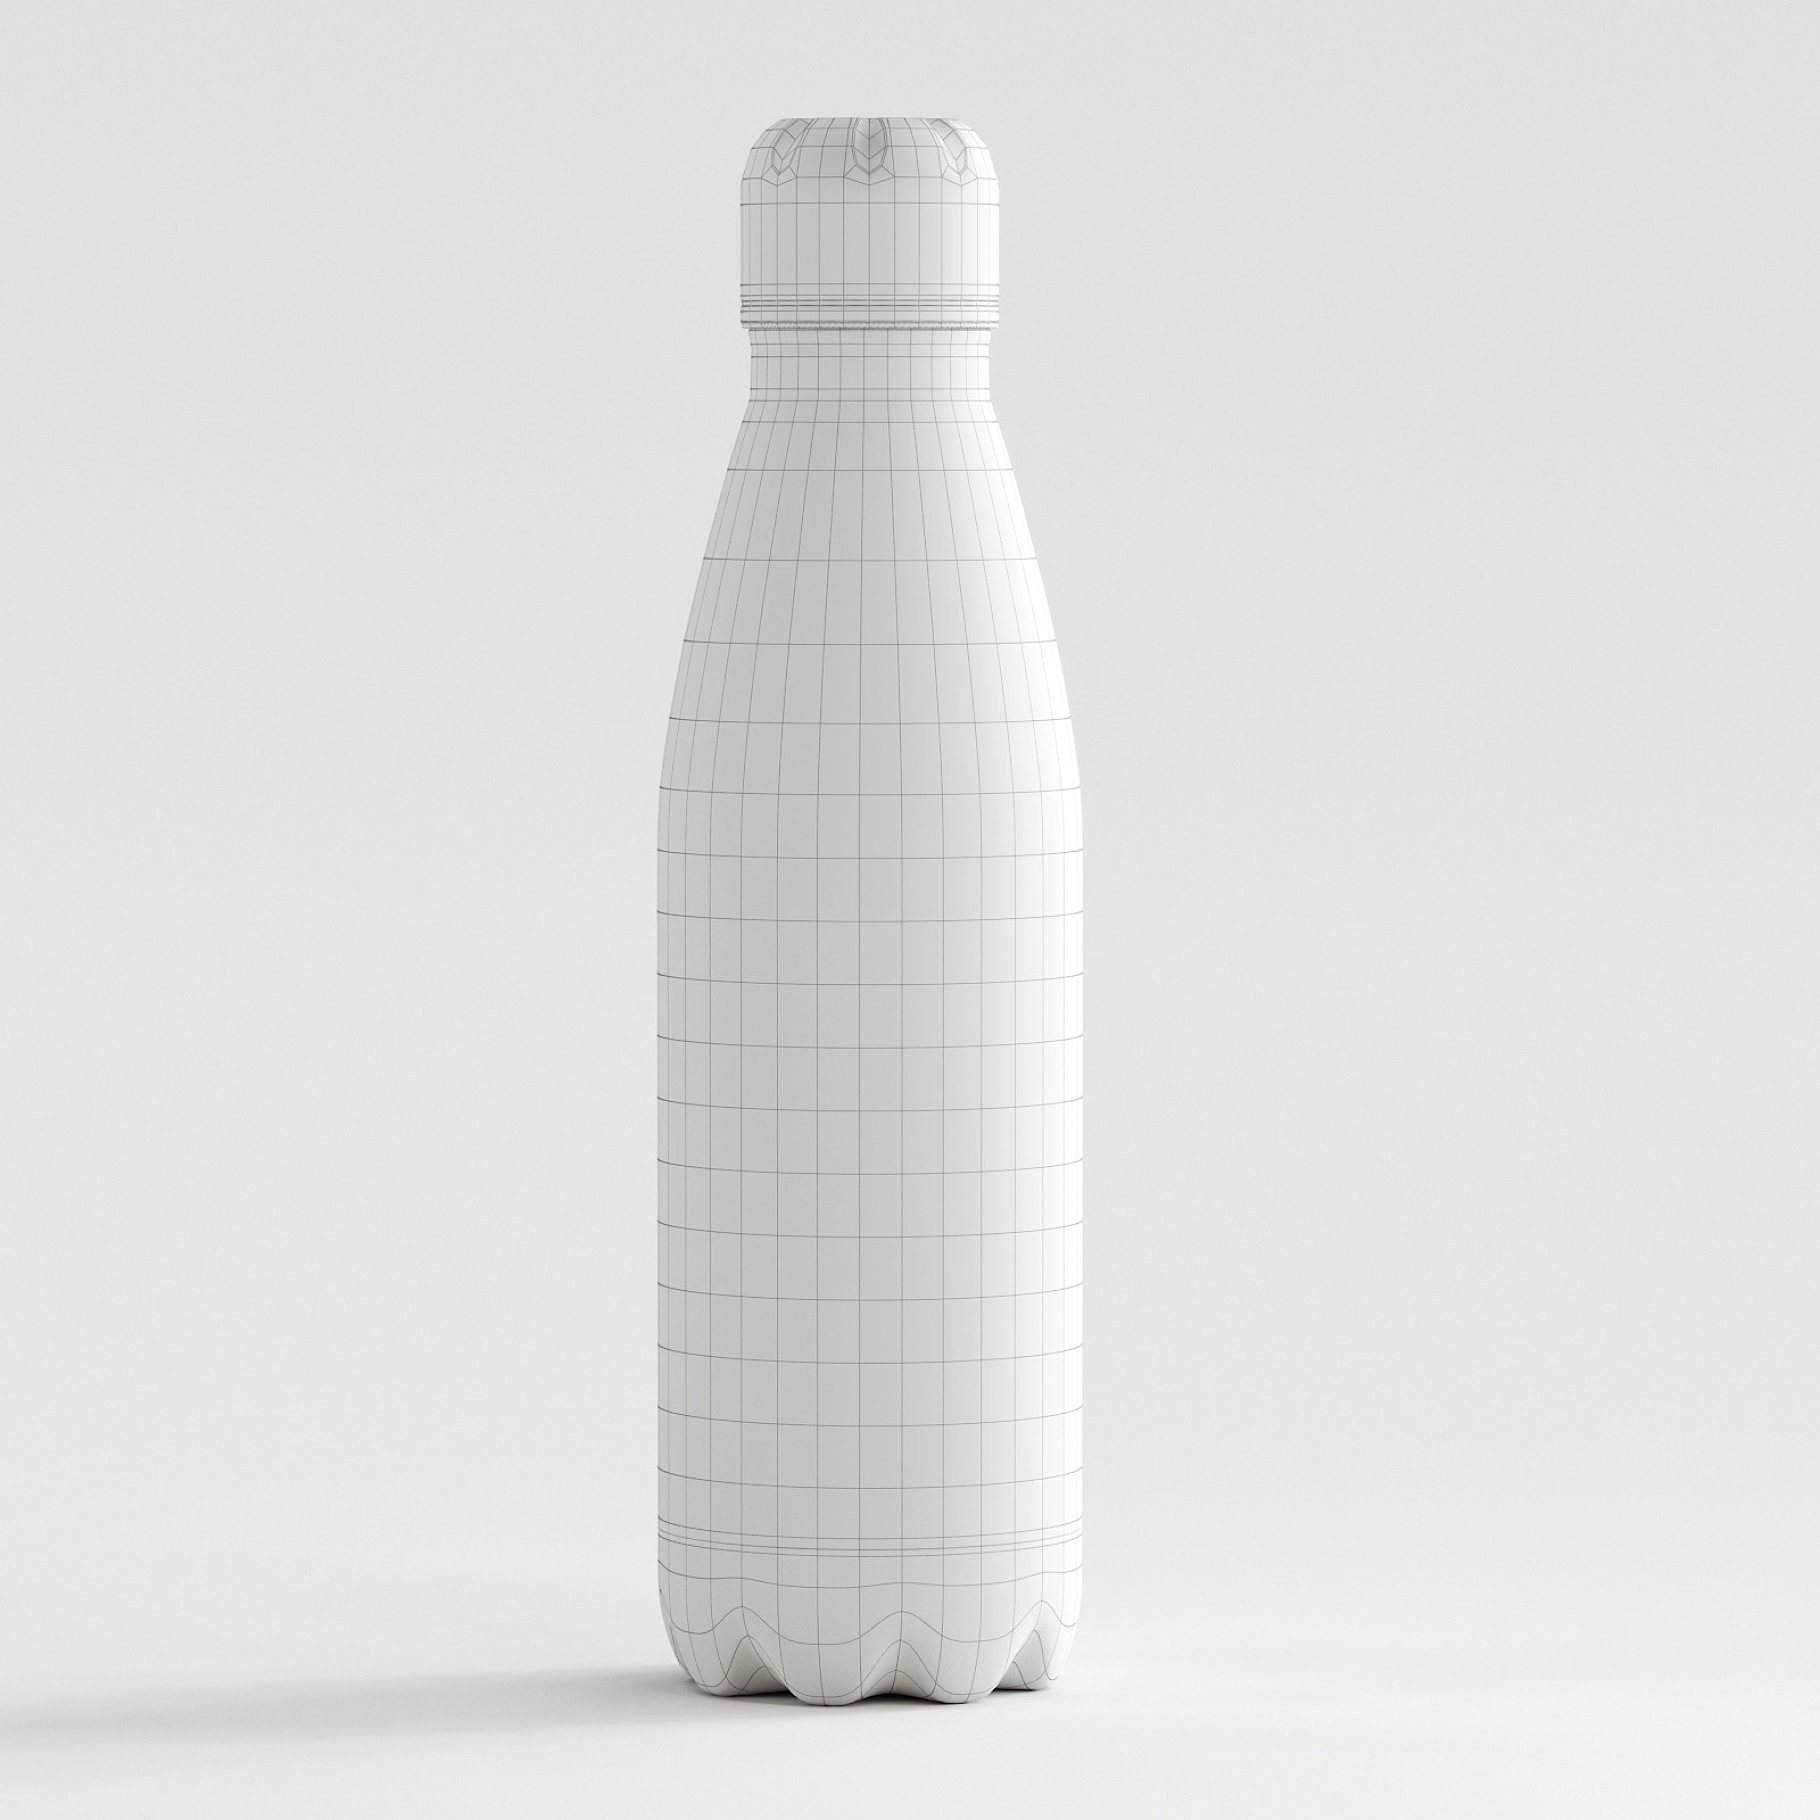 Image of a charming bottle 3d model without textures